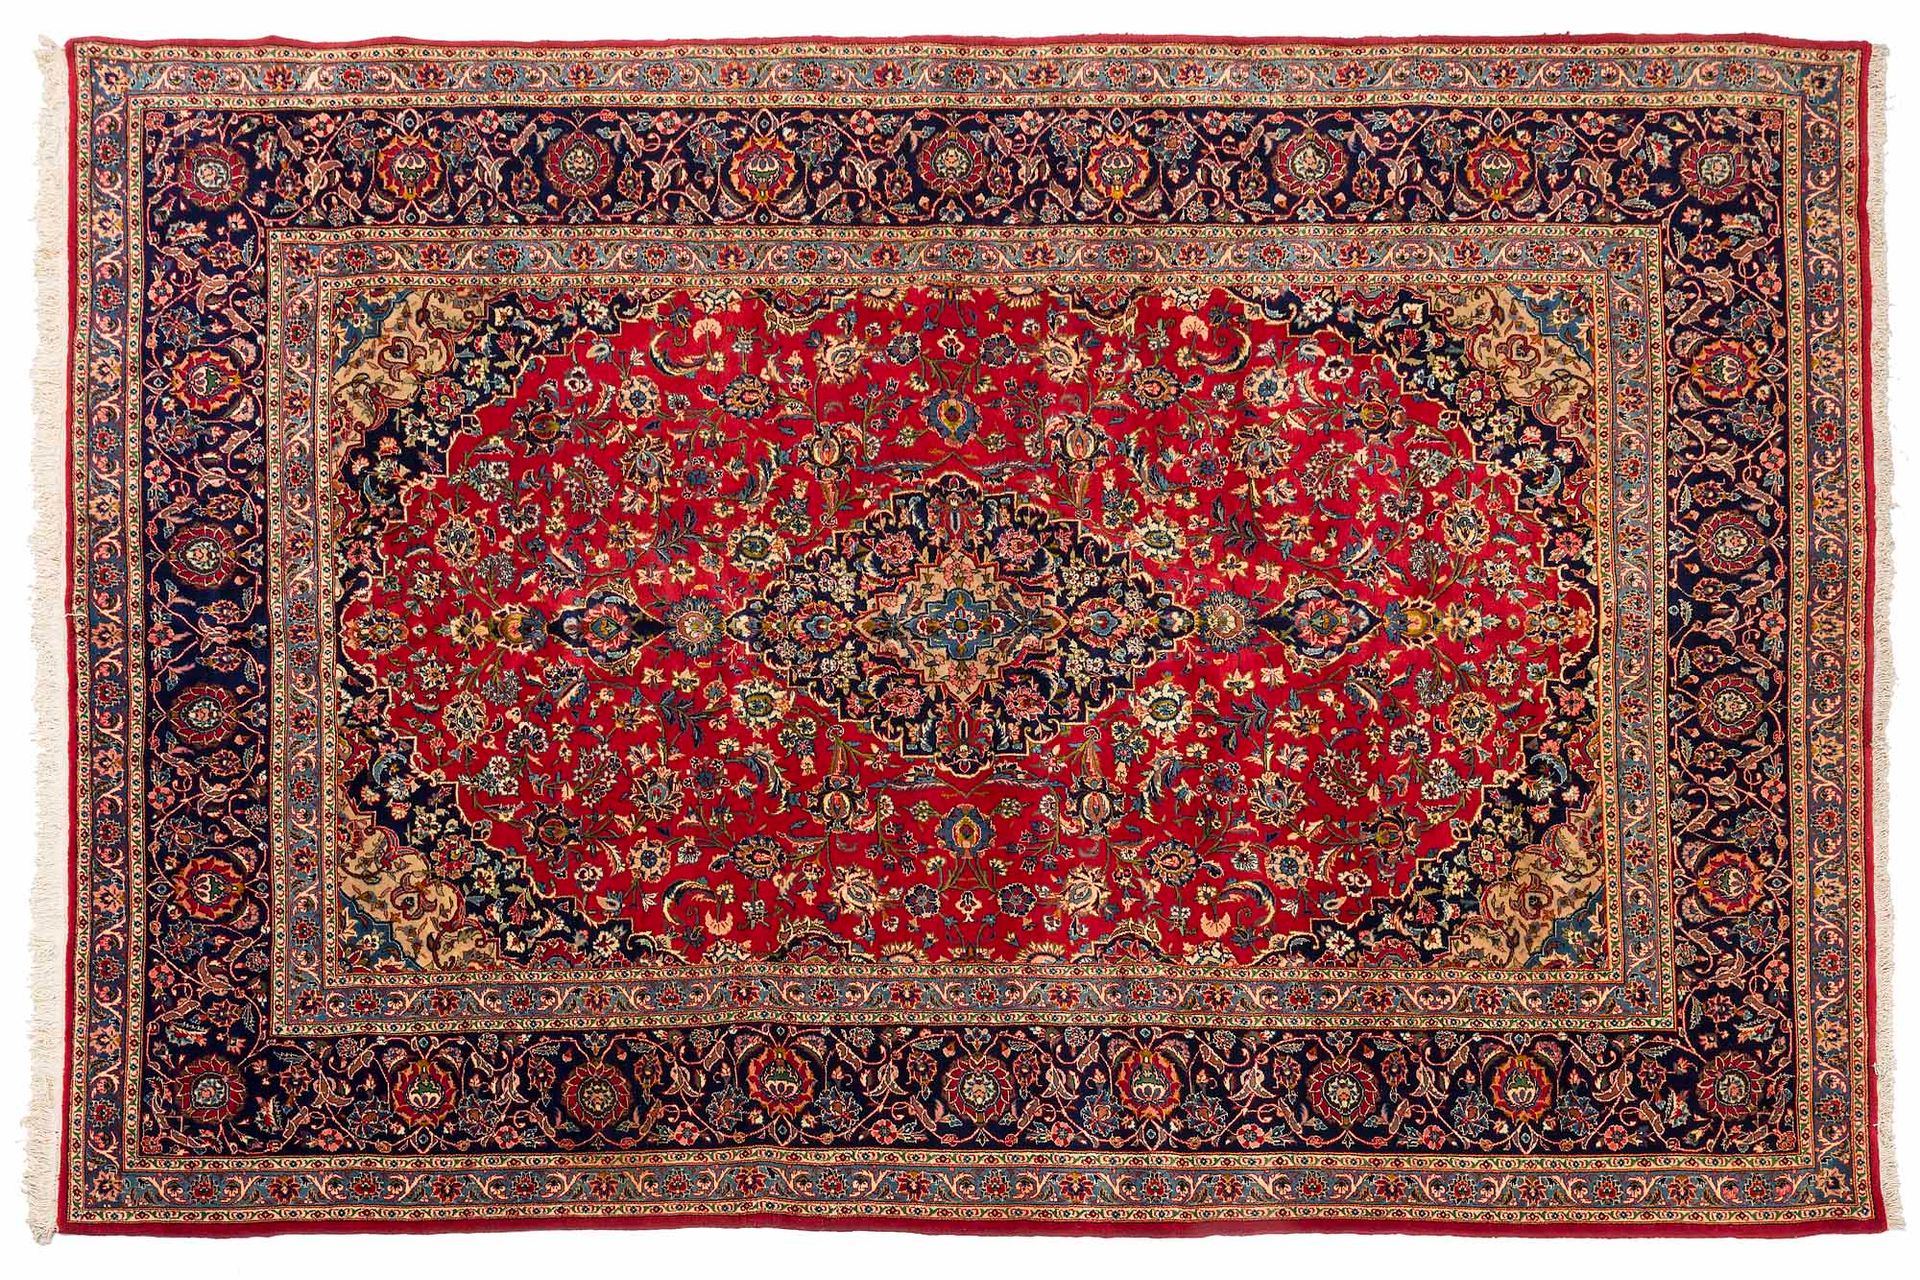 Null KACHAN carpet (Iran), 2nd third of the 20th century

Dimensions : 376 x 253&hellip;